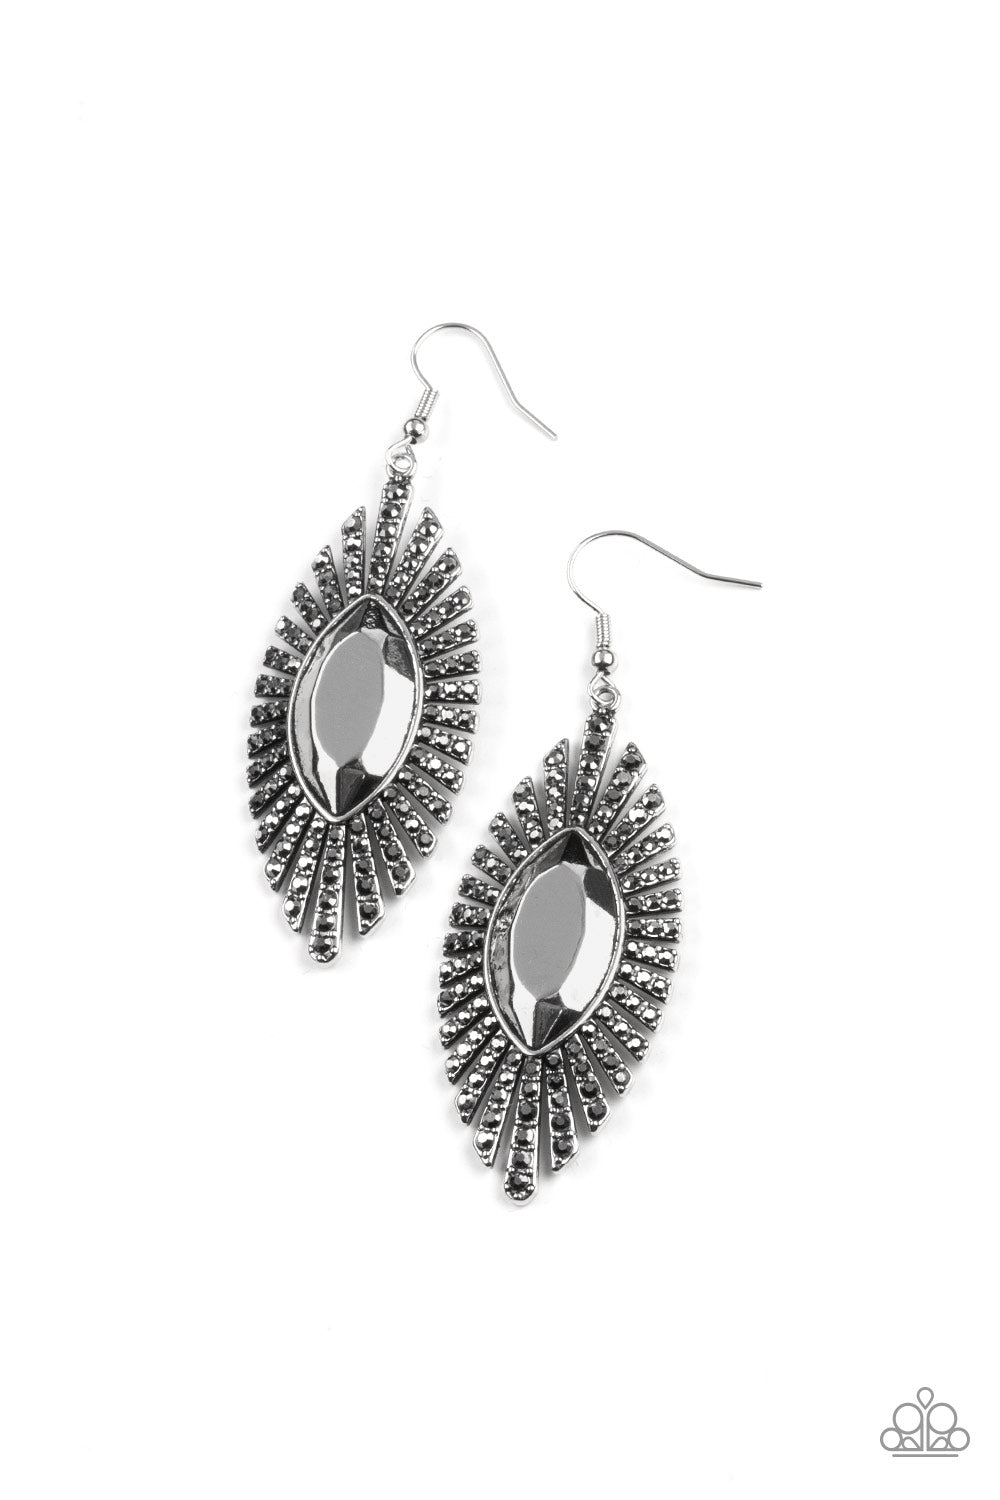 Paparazzi Accessories Who is the FIERCEST of Them All - Silver Earrings - Lady T Accessories